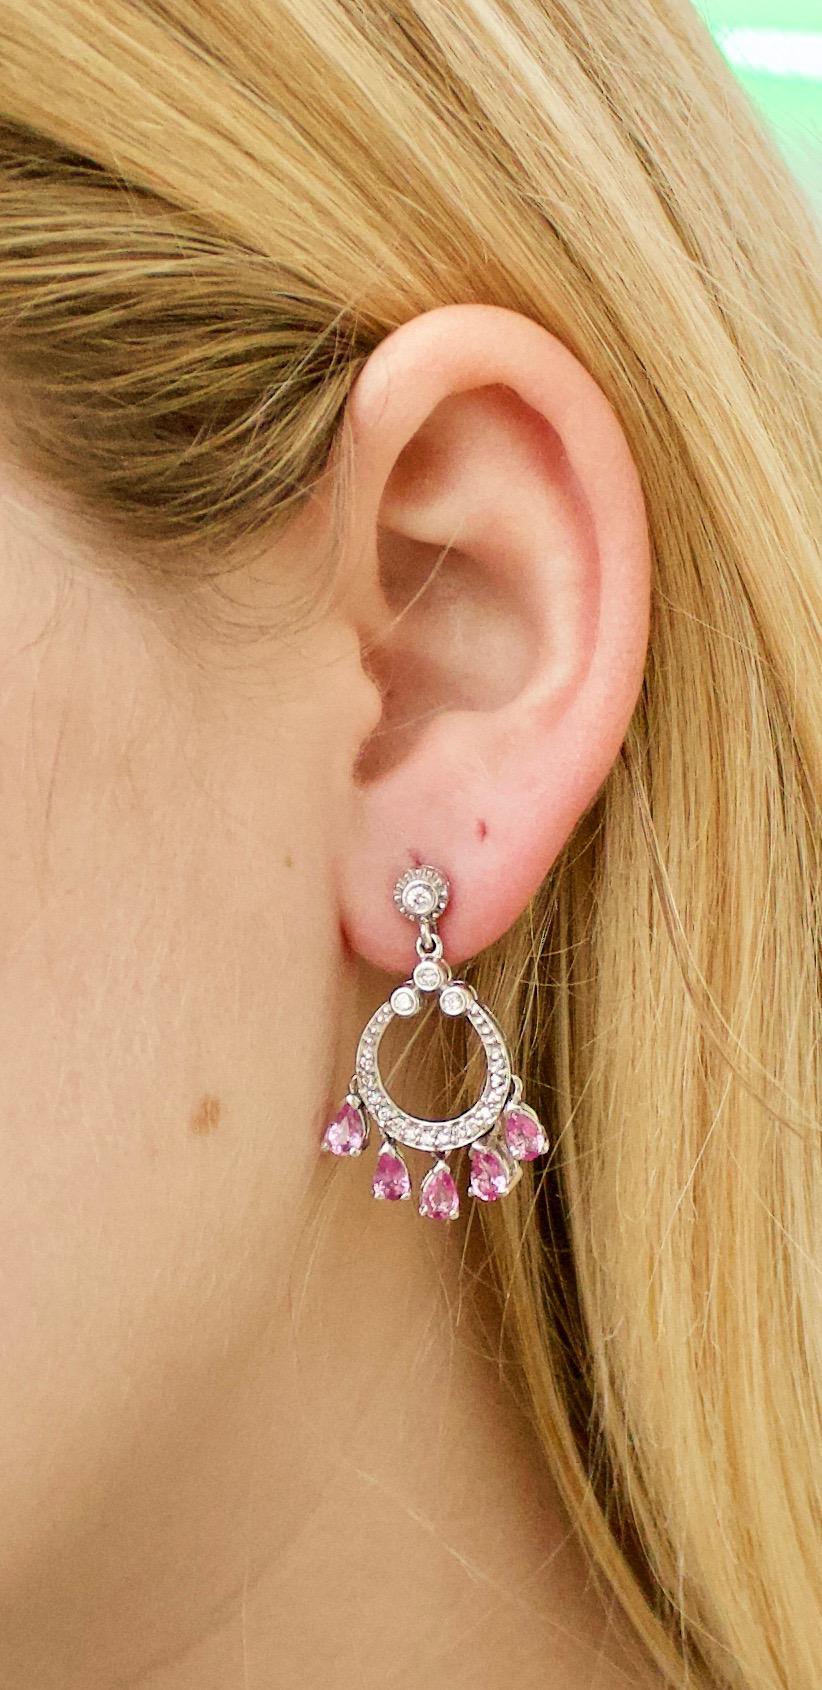 Dangling Pink Sapphire and Diamond Earrings in White Gold
10 Pear Shape Cut Pink Sapphires Weighing 2.00 Carats Approximately [bright with no imperfections visible to the naked eye]
38 Round Brilliant Cut Diamonds Weighing .40 Carats Approximately 
